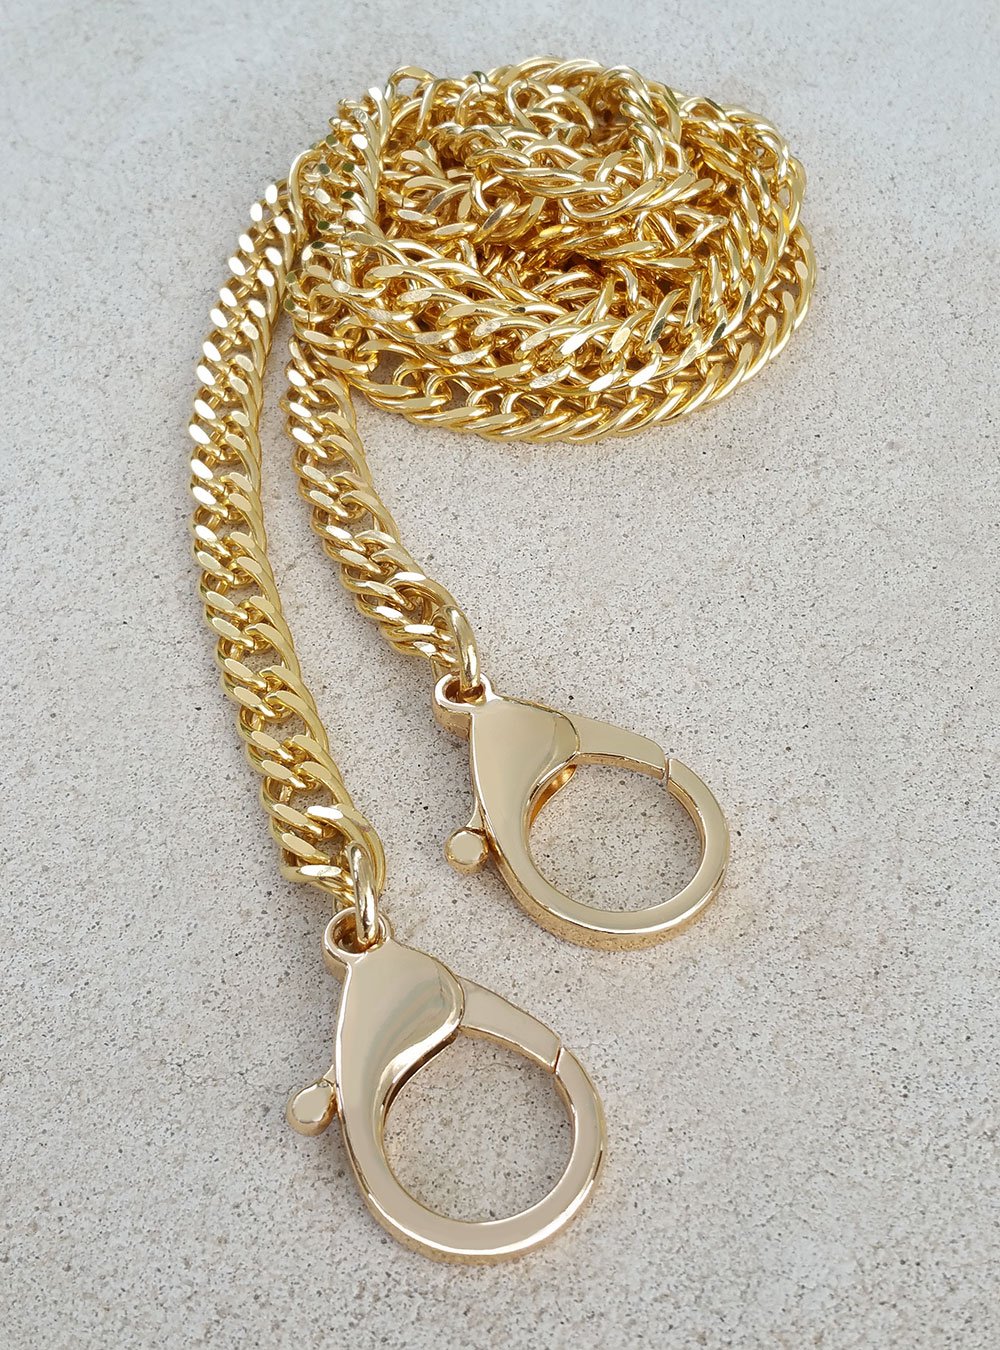 Image of GOLD Chain Purse Strap - Diamond Cut Double Curb - 3/8" Wide - Choice of Length & Clasp